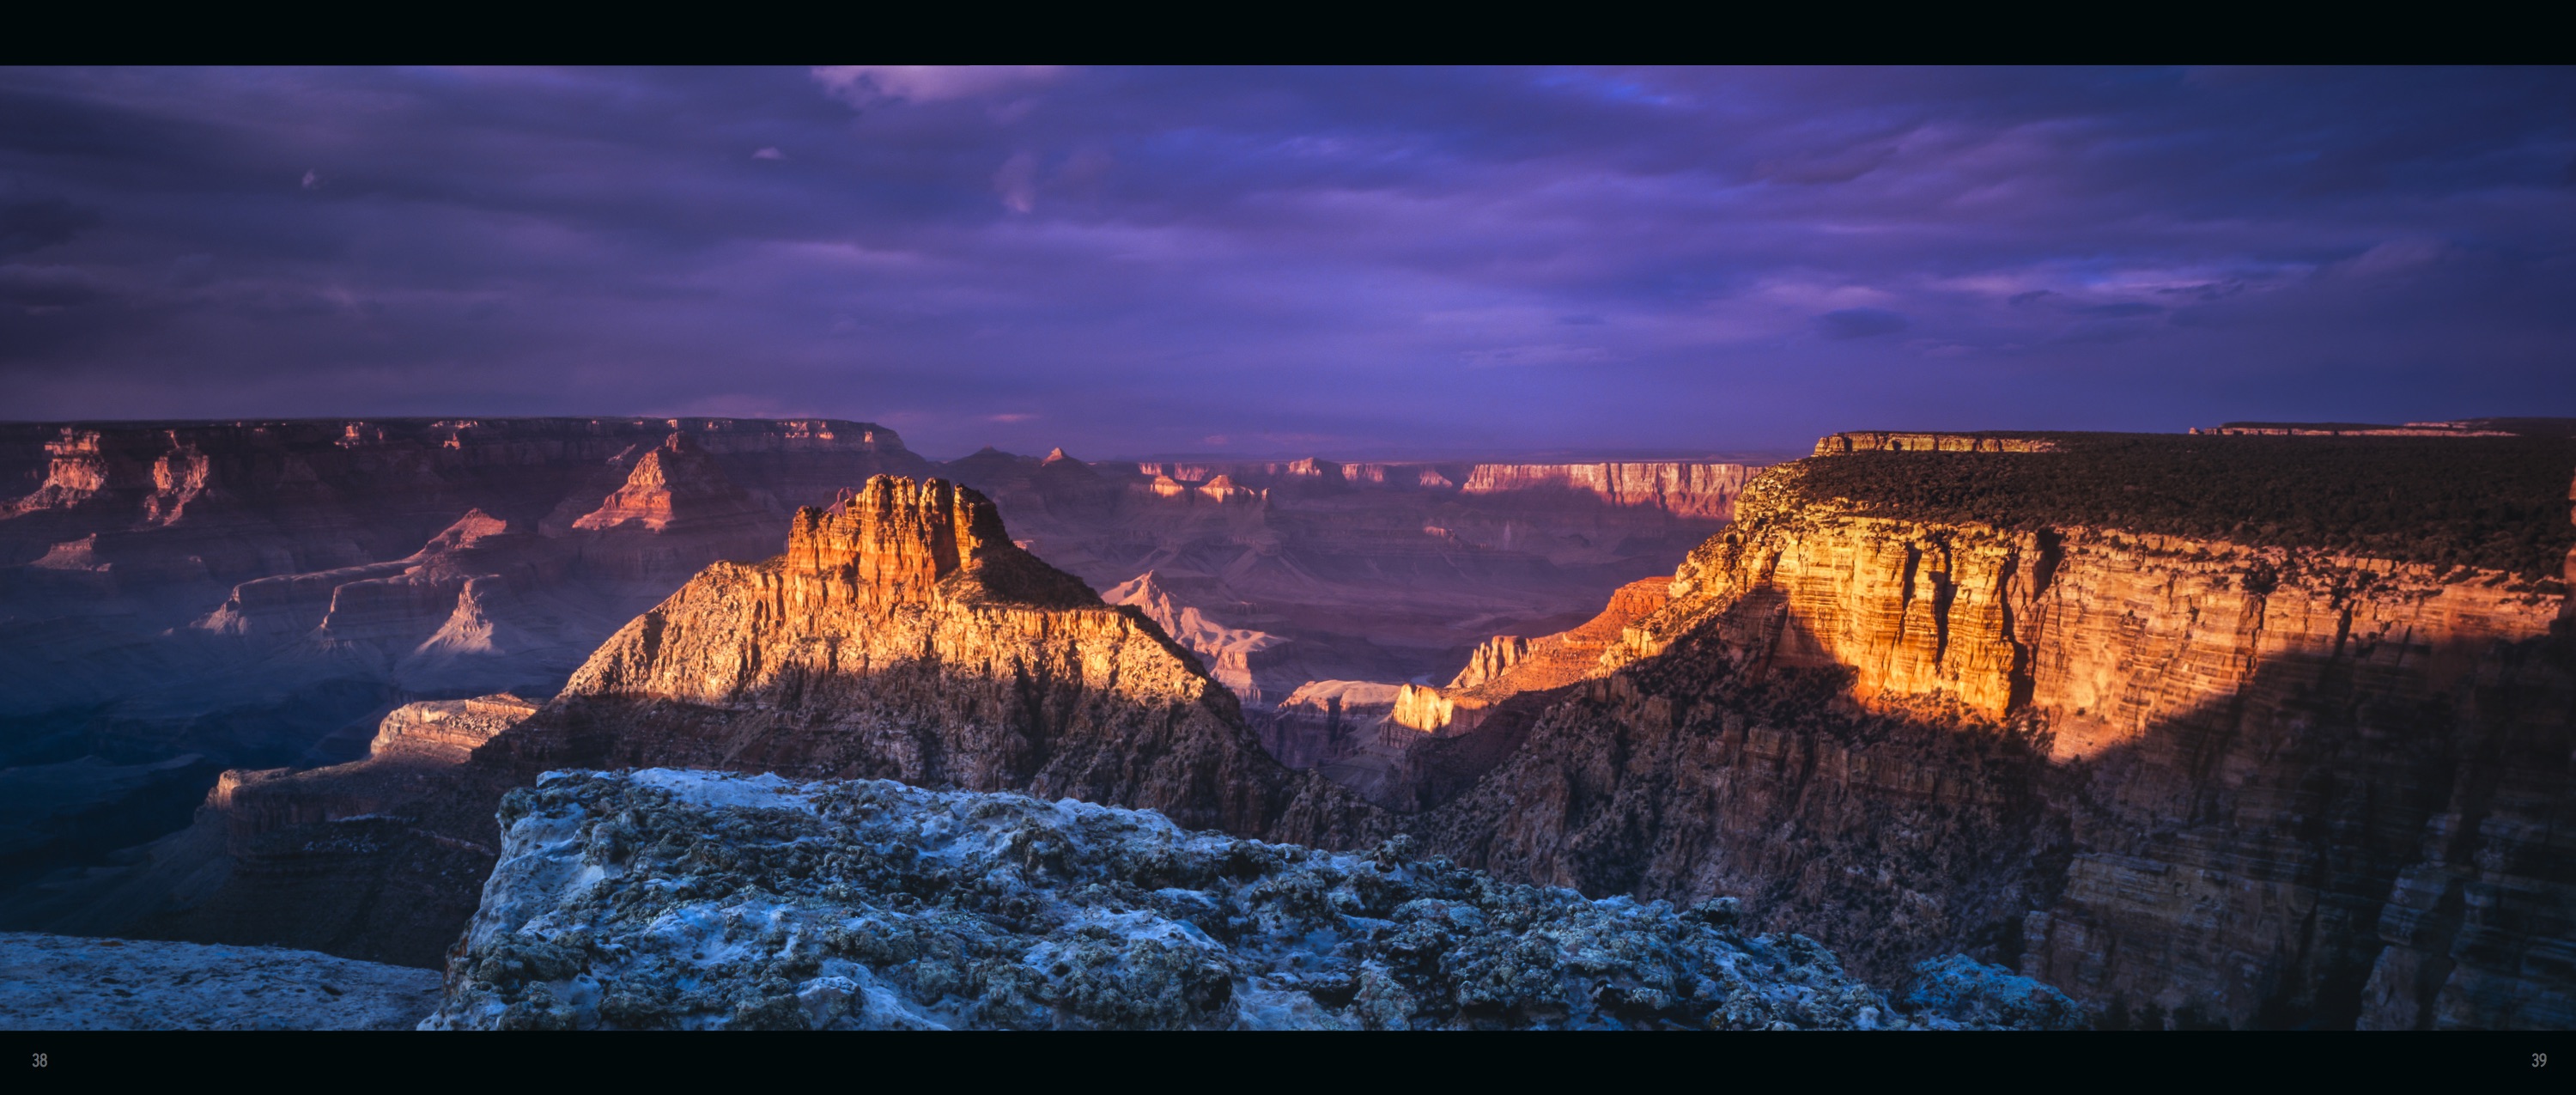 Coronado Butte p. 38 from David Muench's Timeless Moments: Grand Canyon National Park